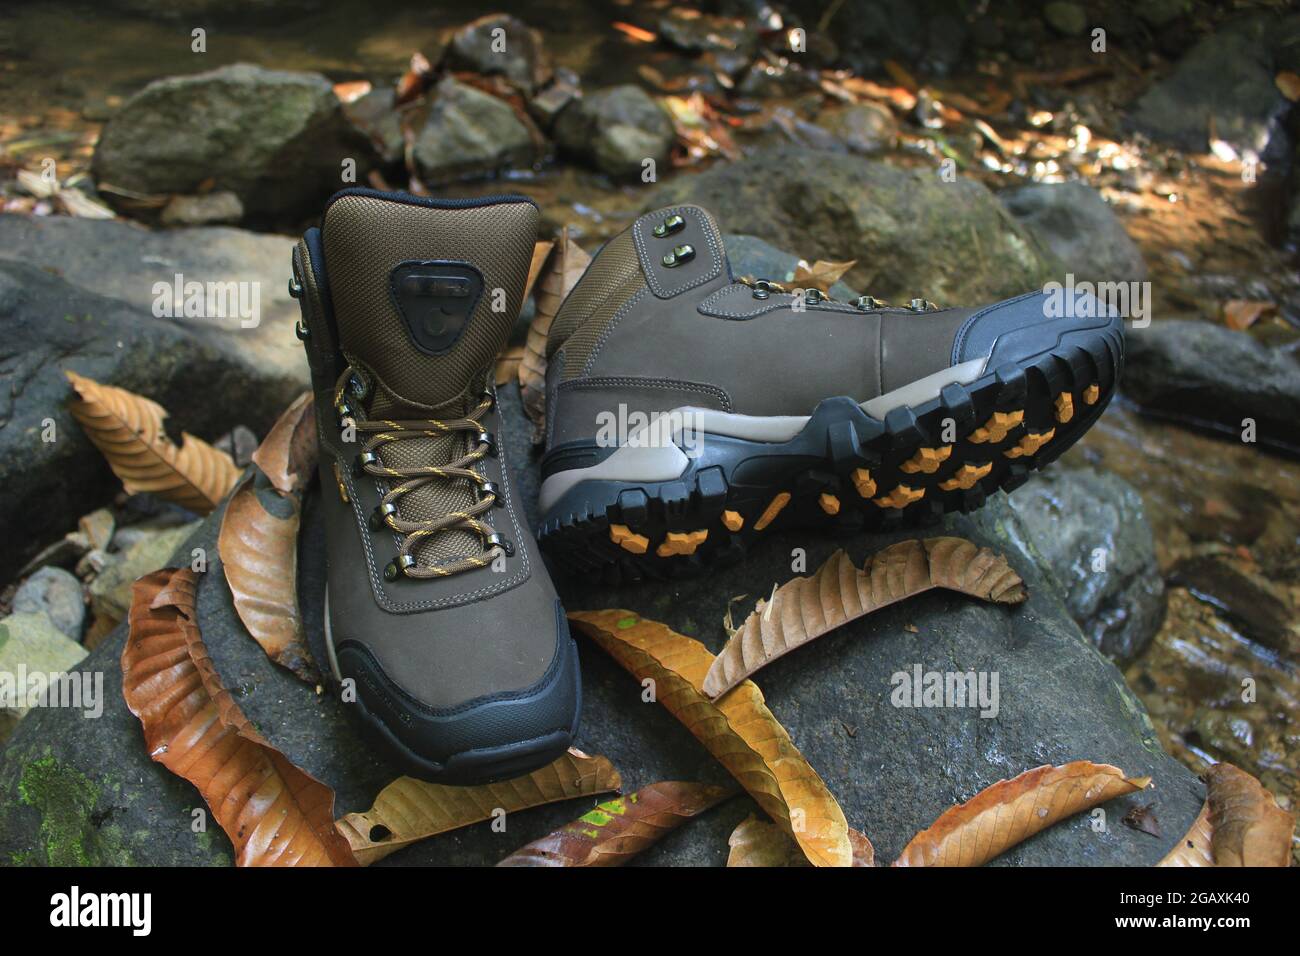 boots with a masculine design for outdoor adventure activities, with jagged soles suitable for tropical and snowy terrain. Stock Photo